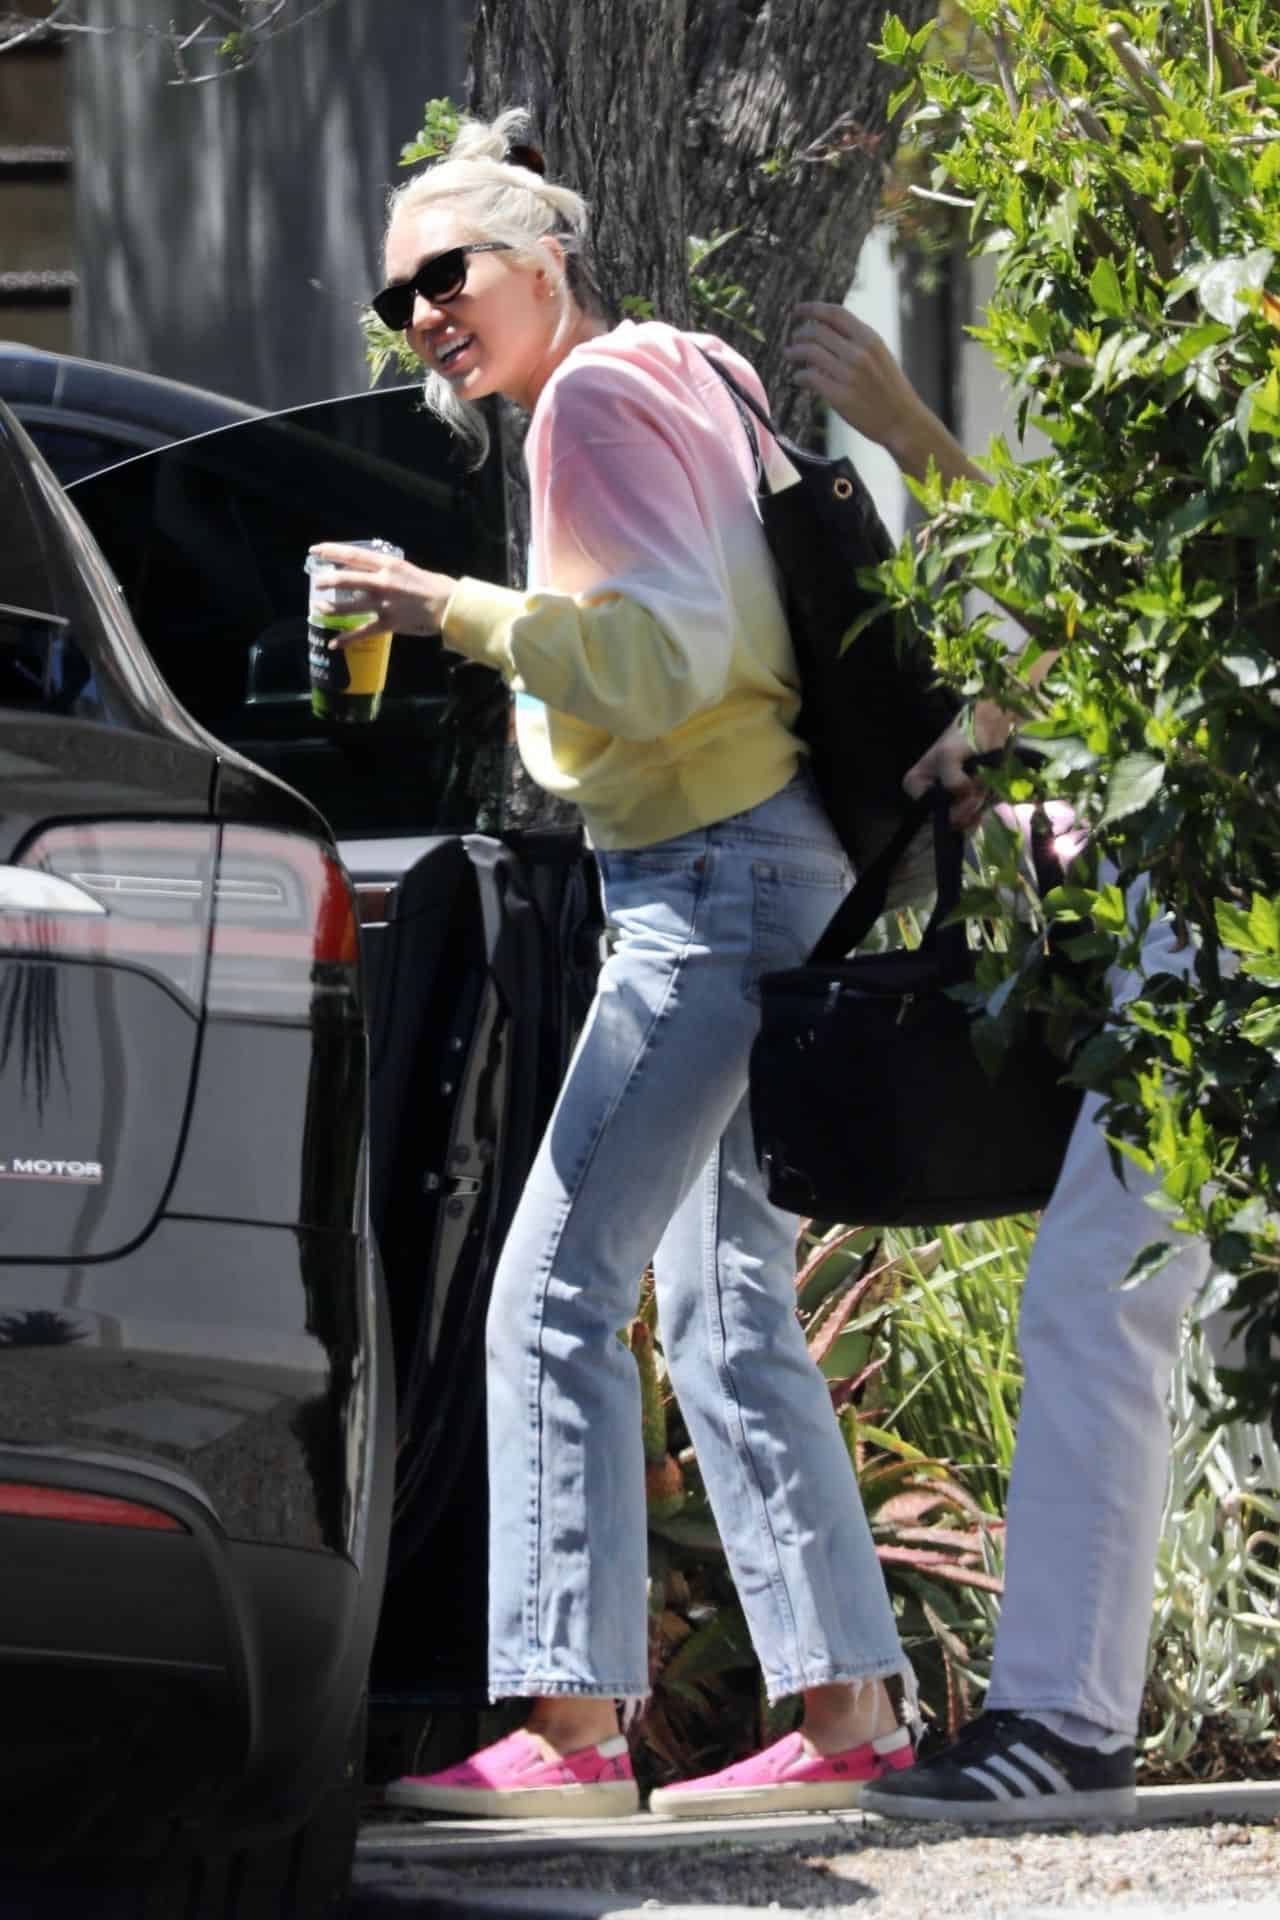 Miley Cyrus Rocks a Casual Look while Leaving the Studio with Maxx Morando